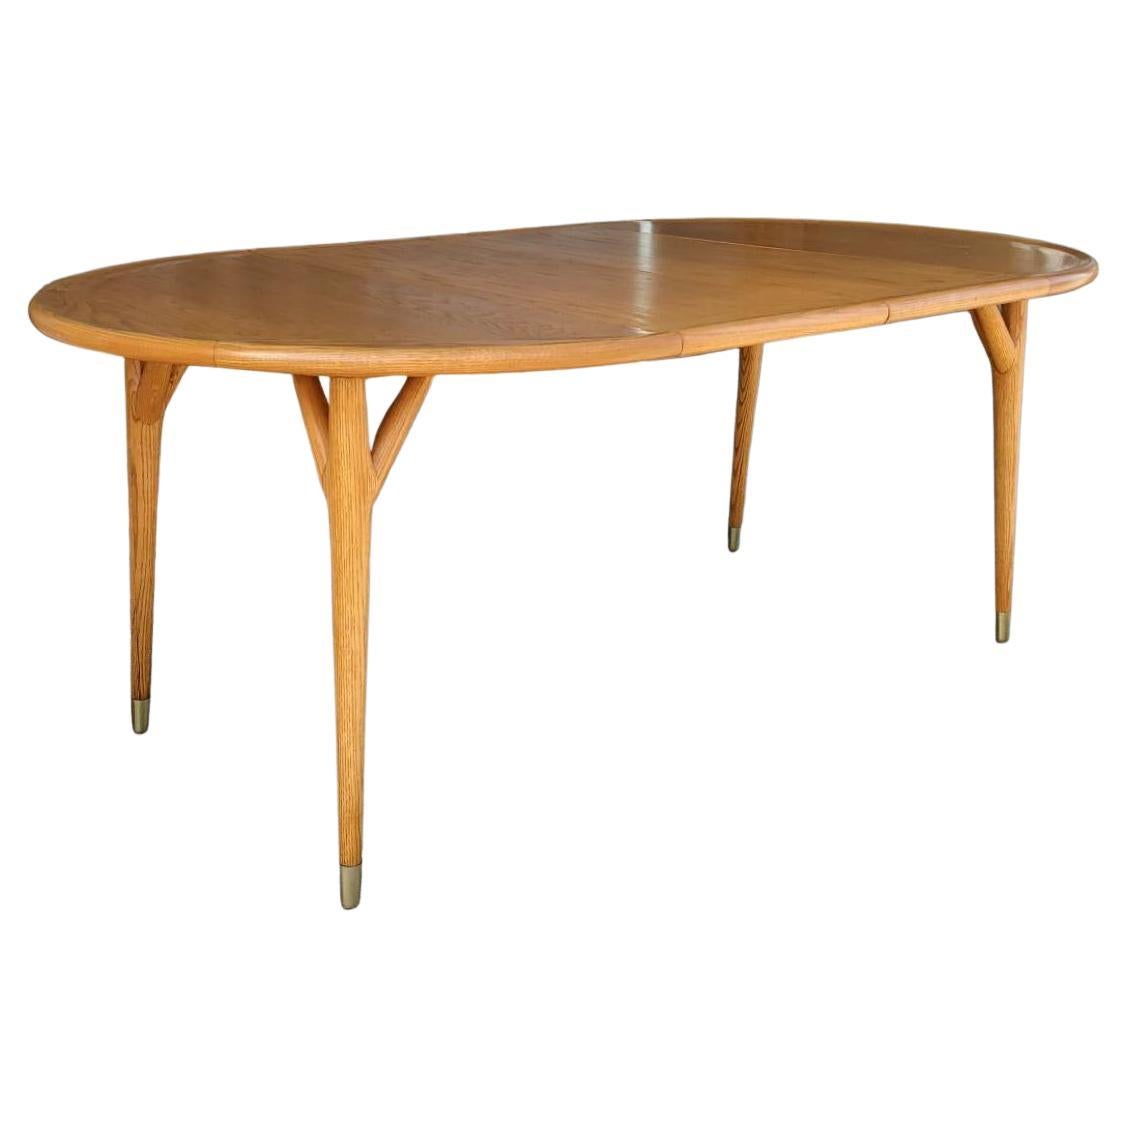 Very Rare 1950s Expandable Paul Laszlo Dining Table with 2 Leaves For Sale